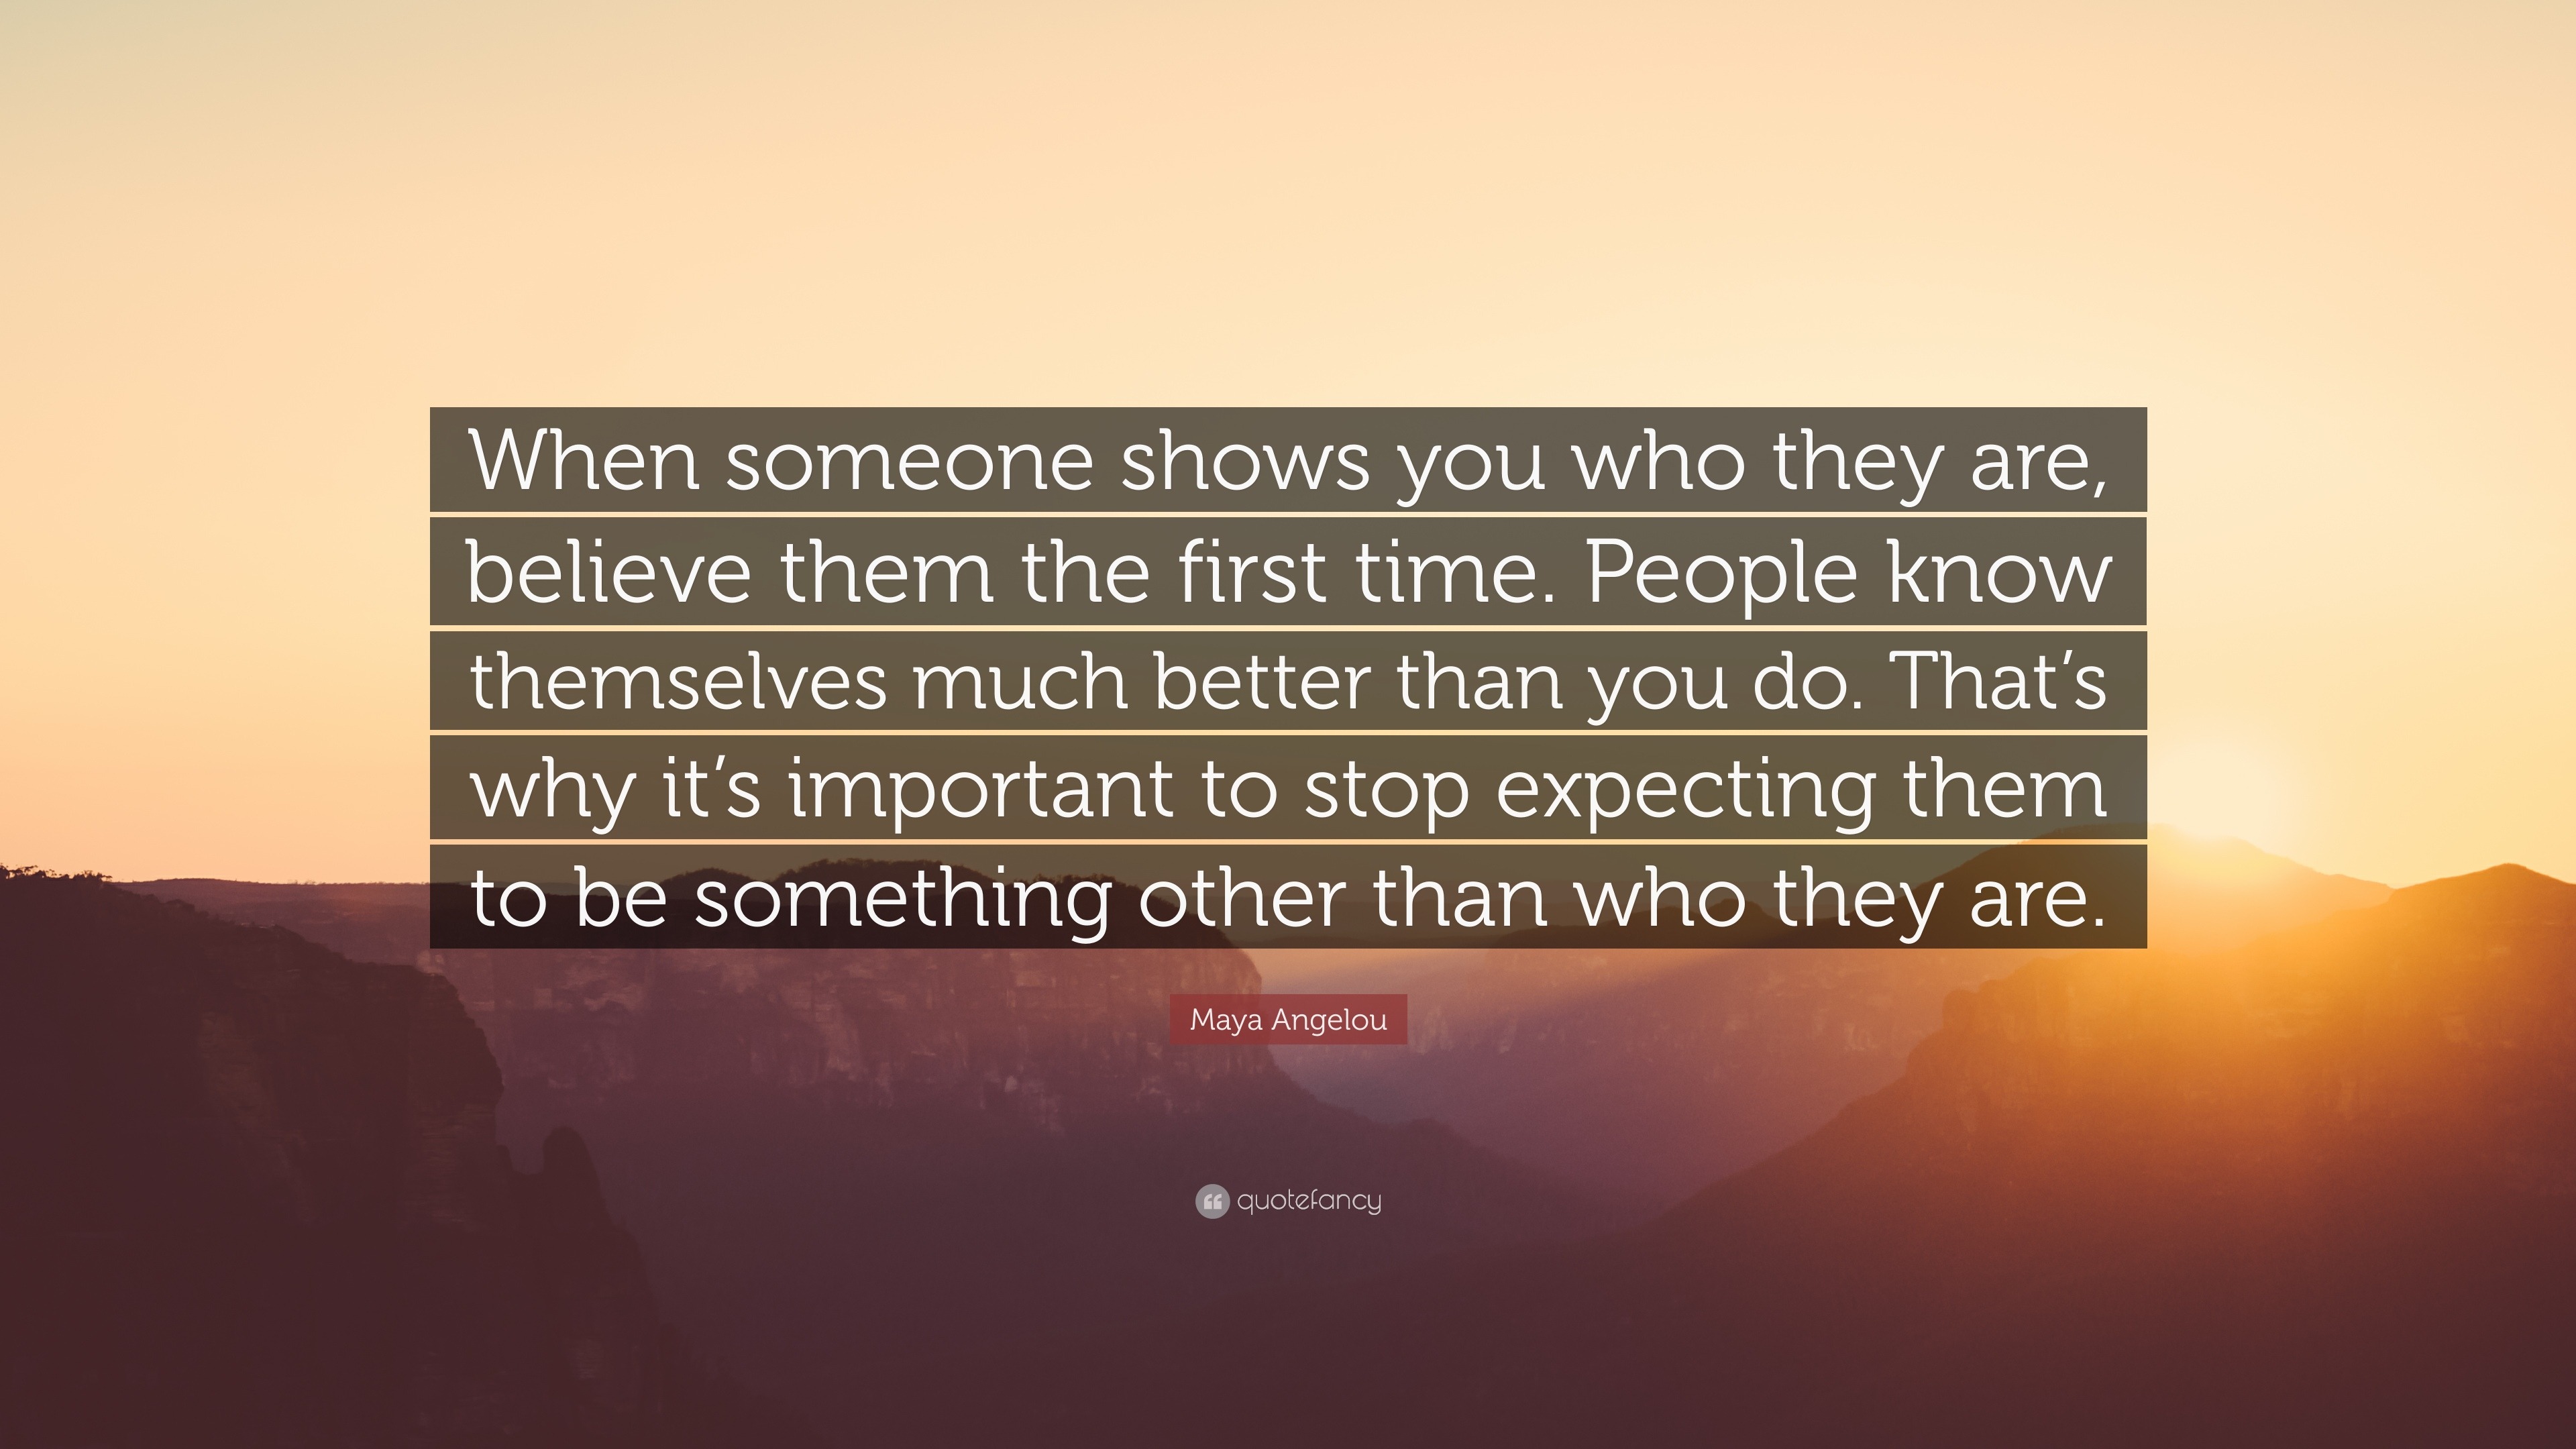 Maya Angelou Quote: “When someone shows you who they are, believe them